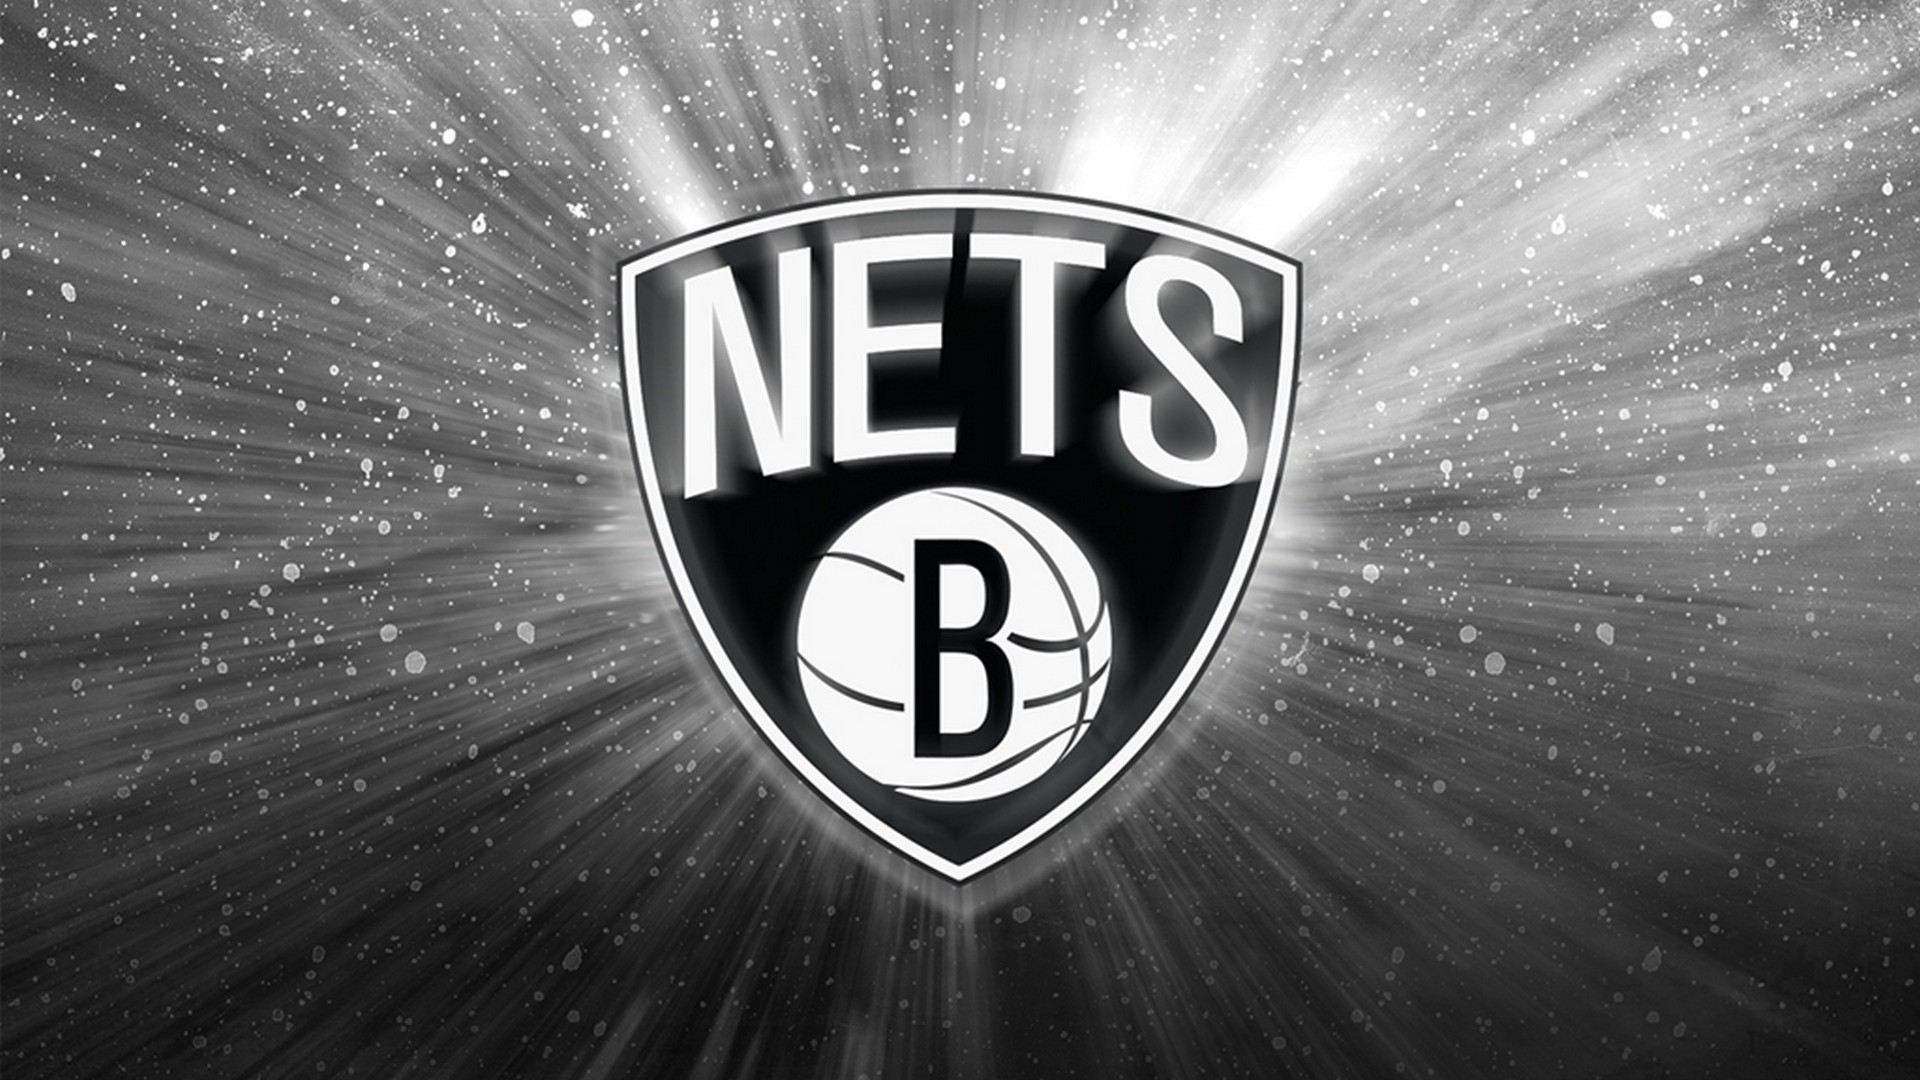 Brooklyn Nets Desktop Wallpaper with image dimensions 1920x1080 pixel. You can make this wallpaper for your Desktop Computer Backgrounds, Windows or Mac Screensavers, iPhone Lock screen, Tablet or Android and another Mobile Phone device